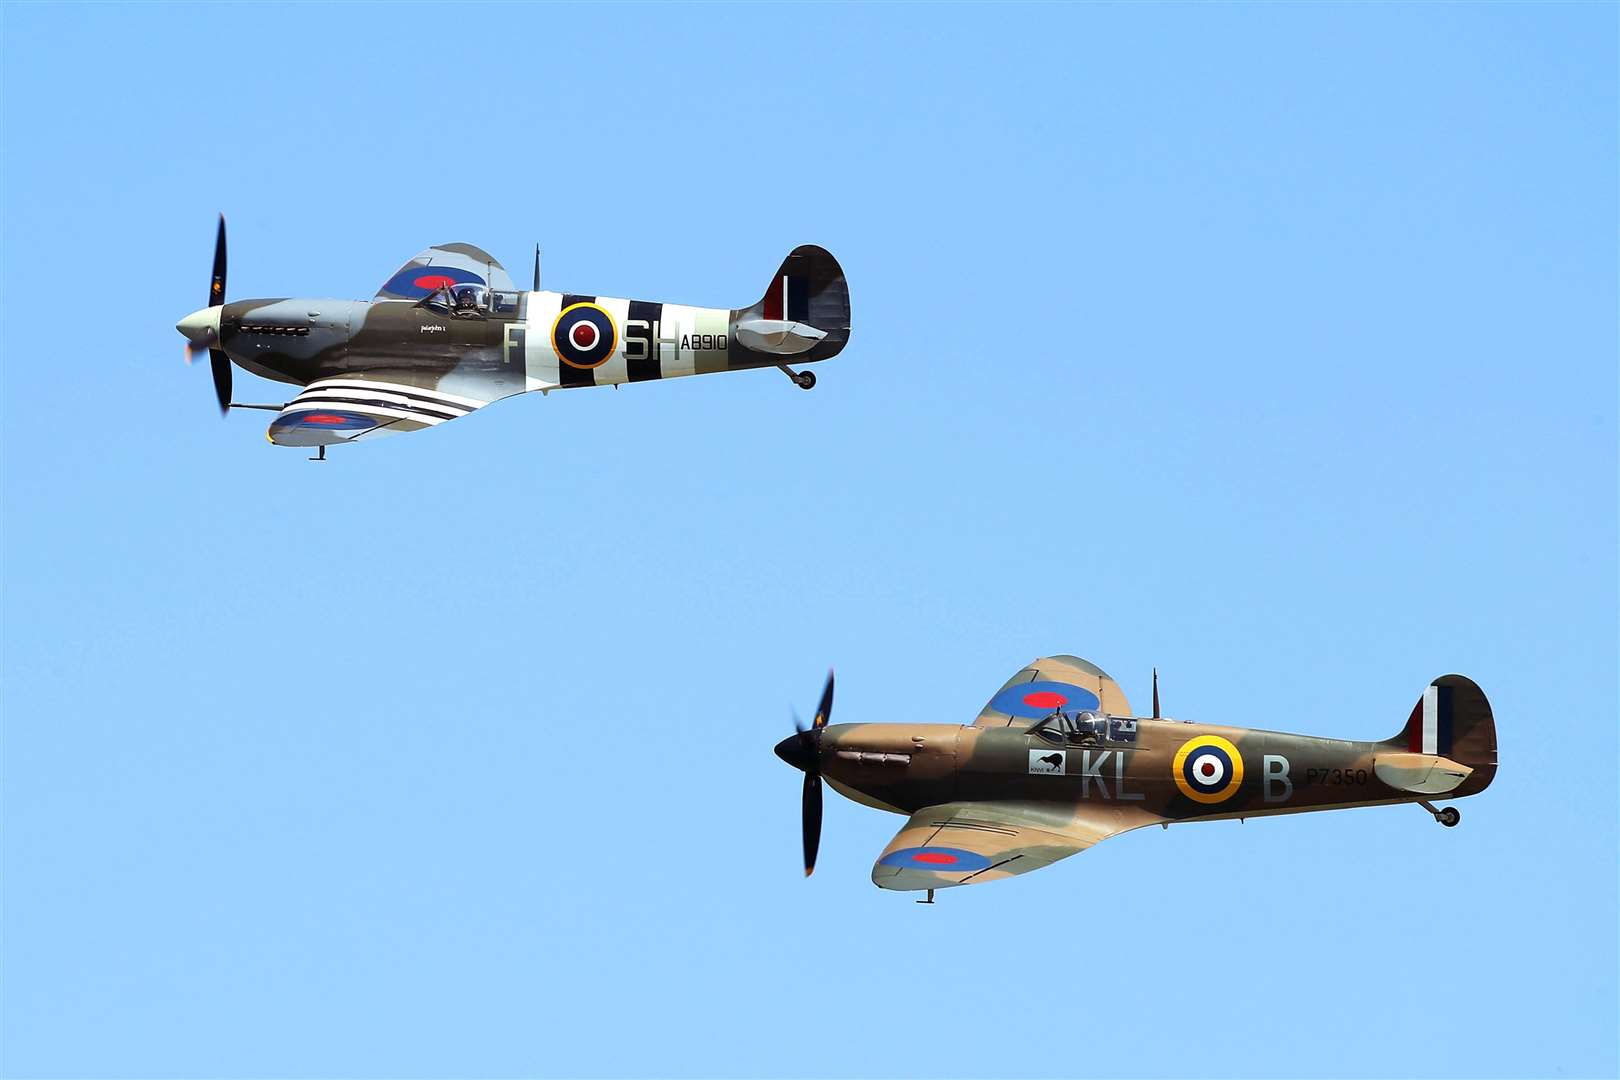 Spitfires played a crucial role in the Battle of Britain. Picture: PA